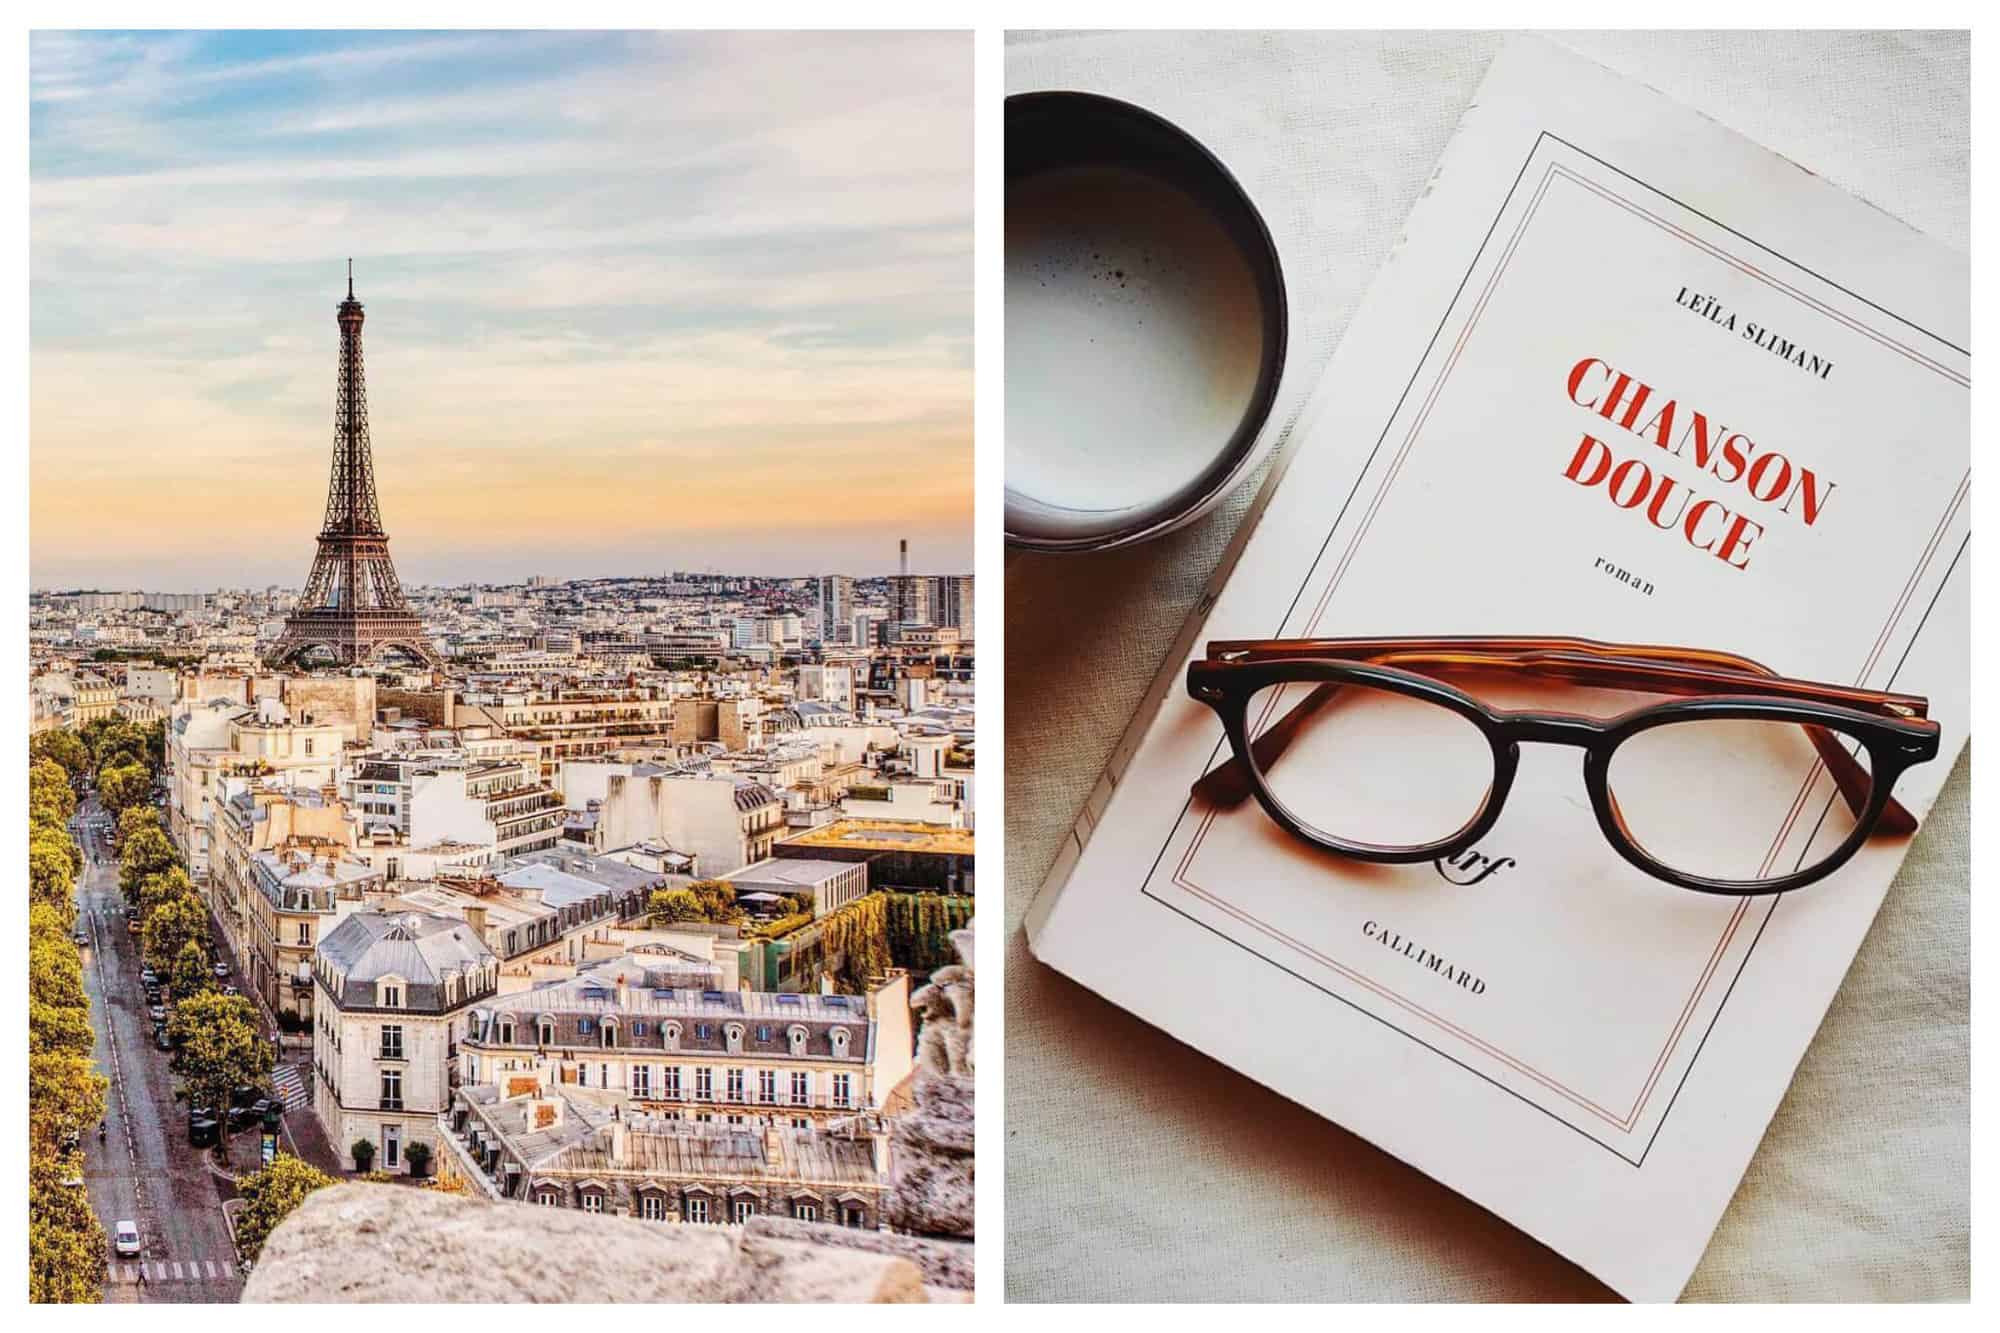 Left: A beautiful photo of the Eiffel Tower taken from a high standpoint where you can also see the surrounding buildings, the trees lining the streets, and a white van. It also shows the sunset approaching the sky. The sky is blue but also orange with a few streaks of clouds. Right: The book "Chanson Douce" by french author Leïla Slimani is lying possibly on a mattress. Beside the book is an unlit white candle. On top of the book is a pair of glasses.